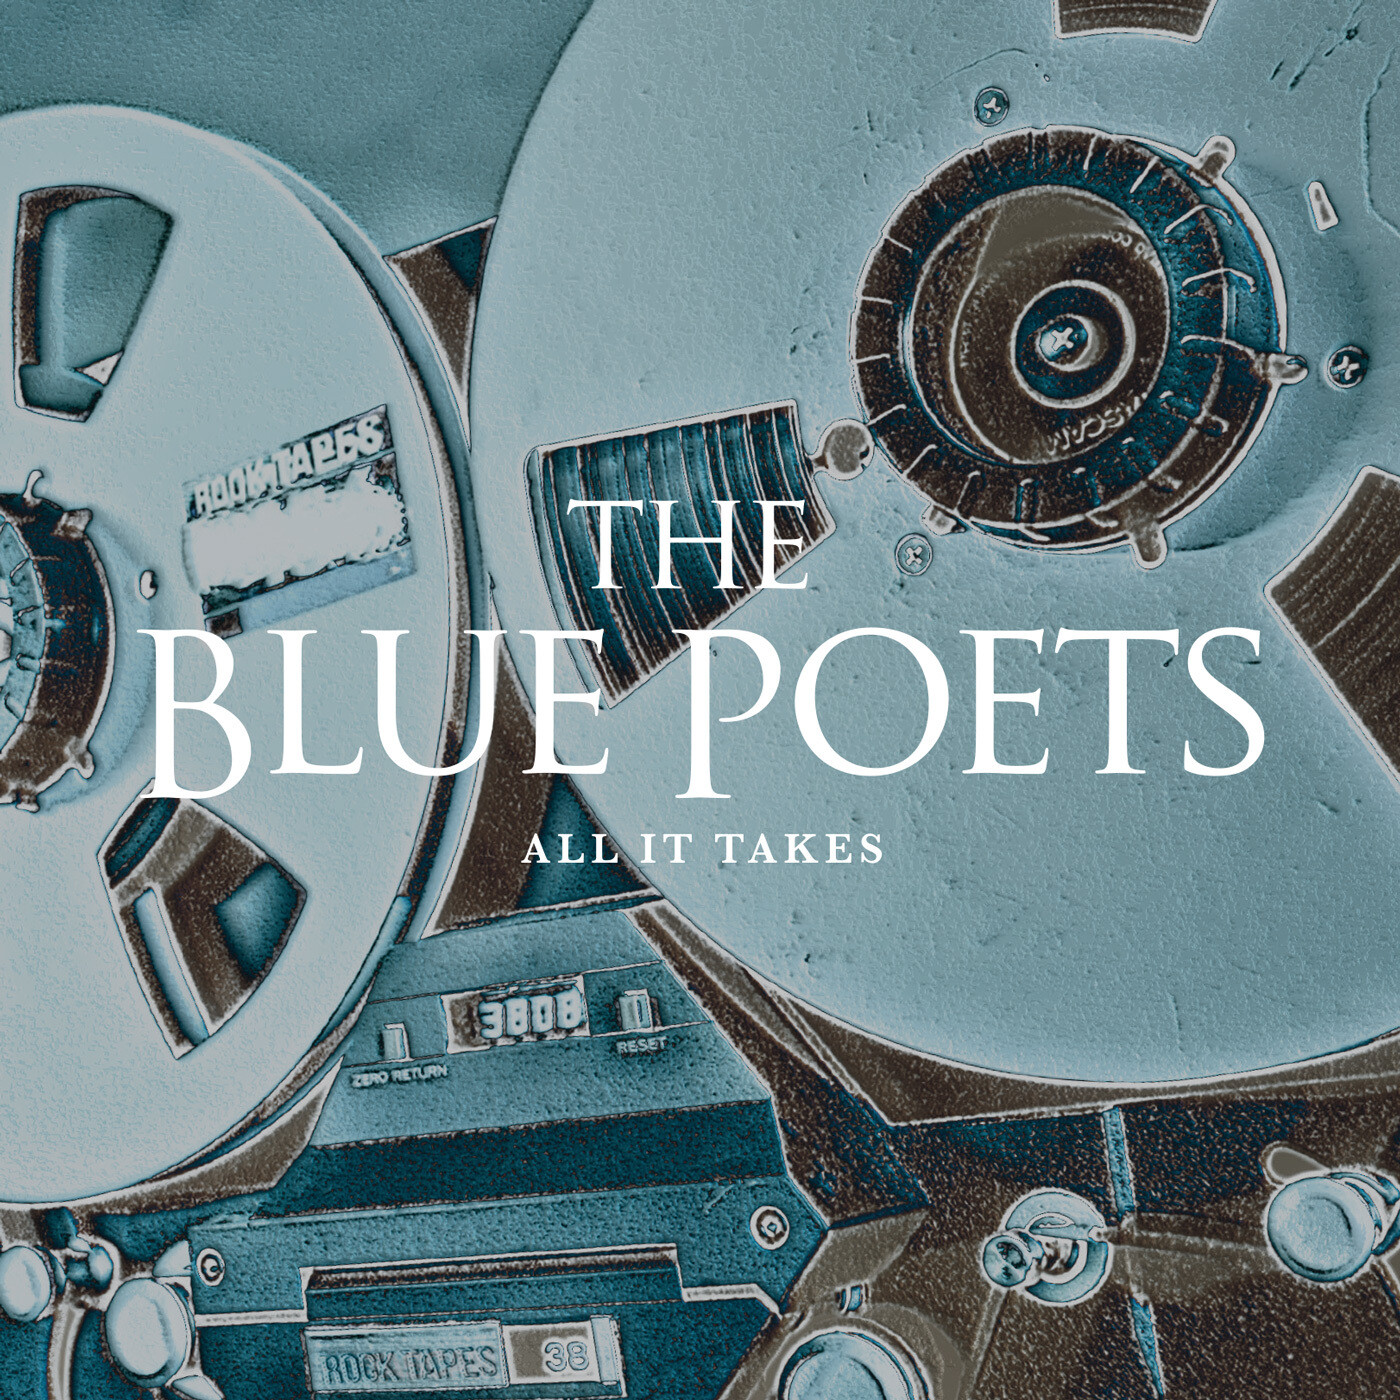 The Blue Poets - All It Takes (MP3/Flac Digital Download)